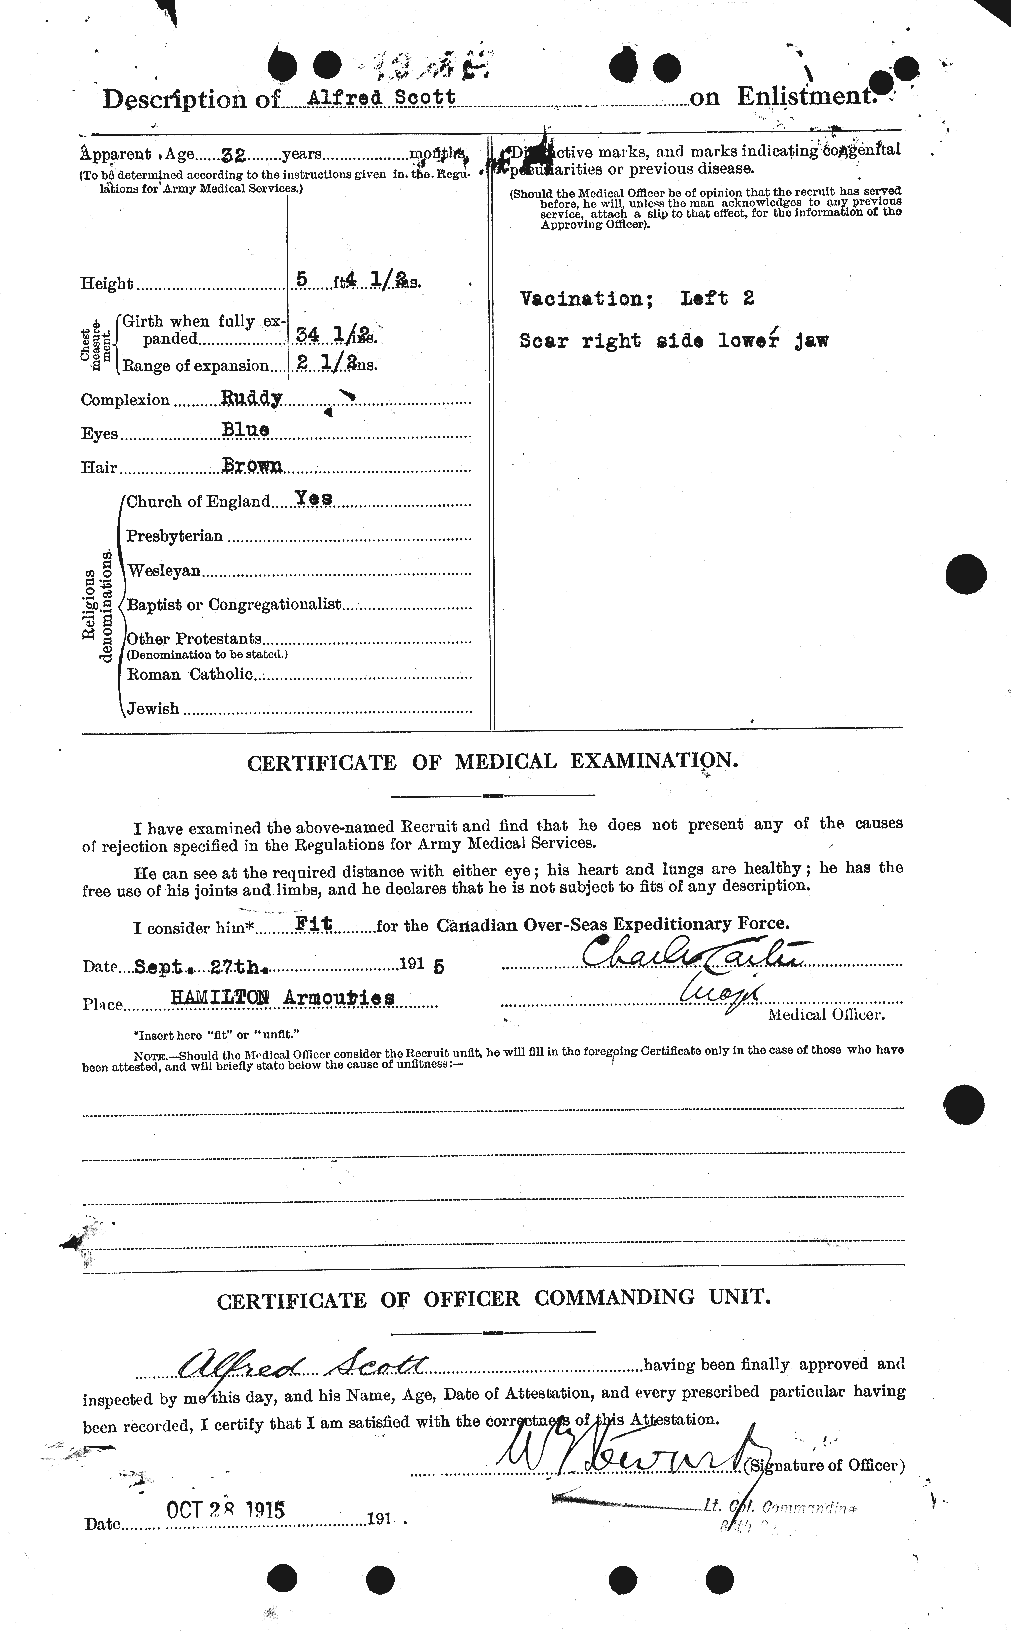 Personnel Records of the First World War - CEF 086589b